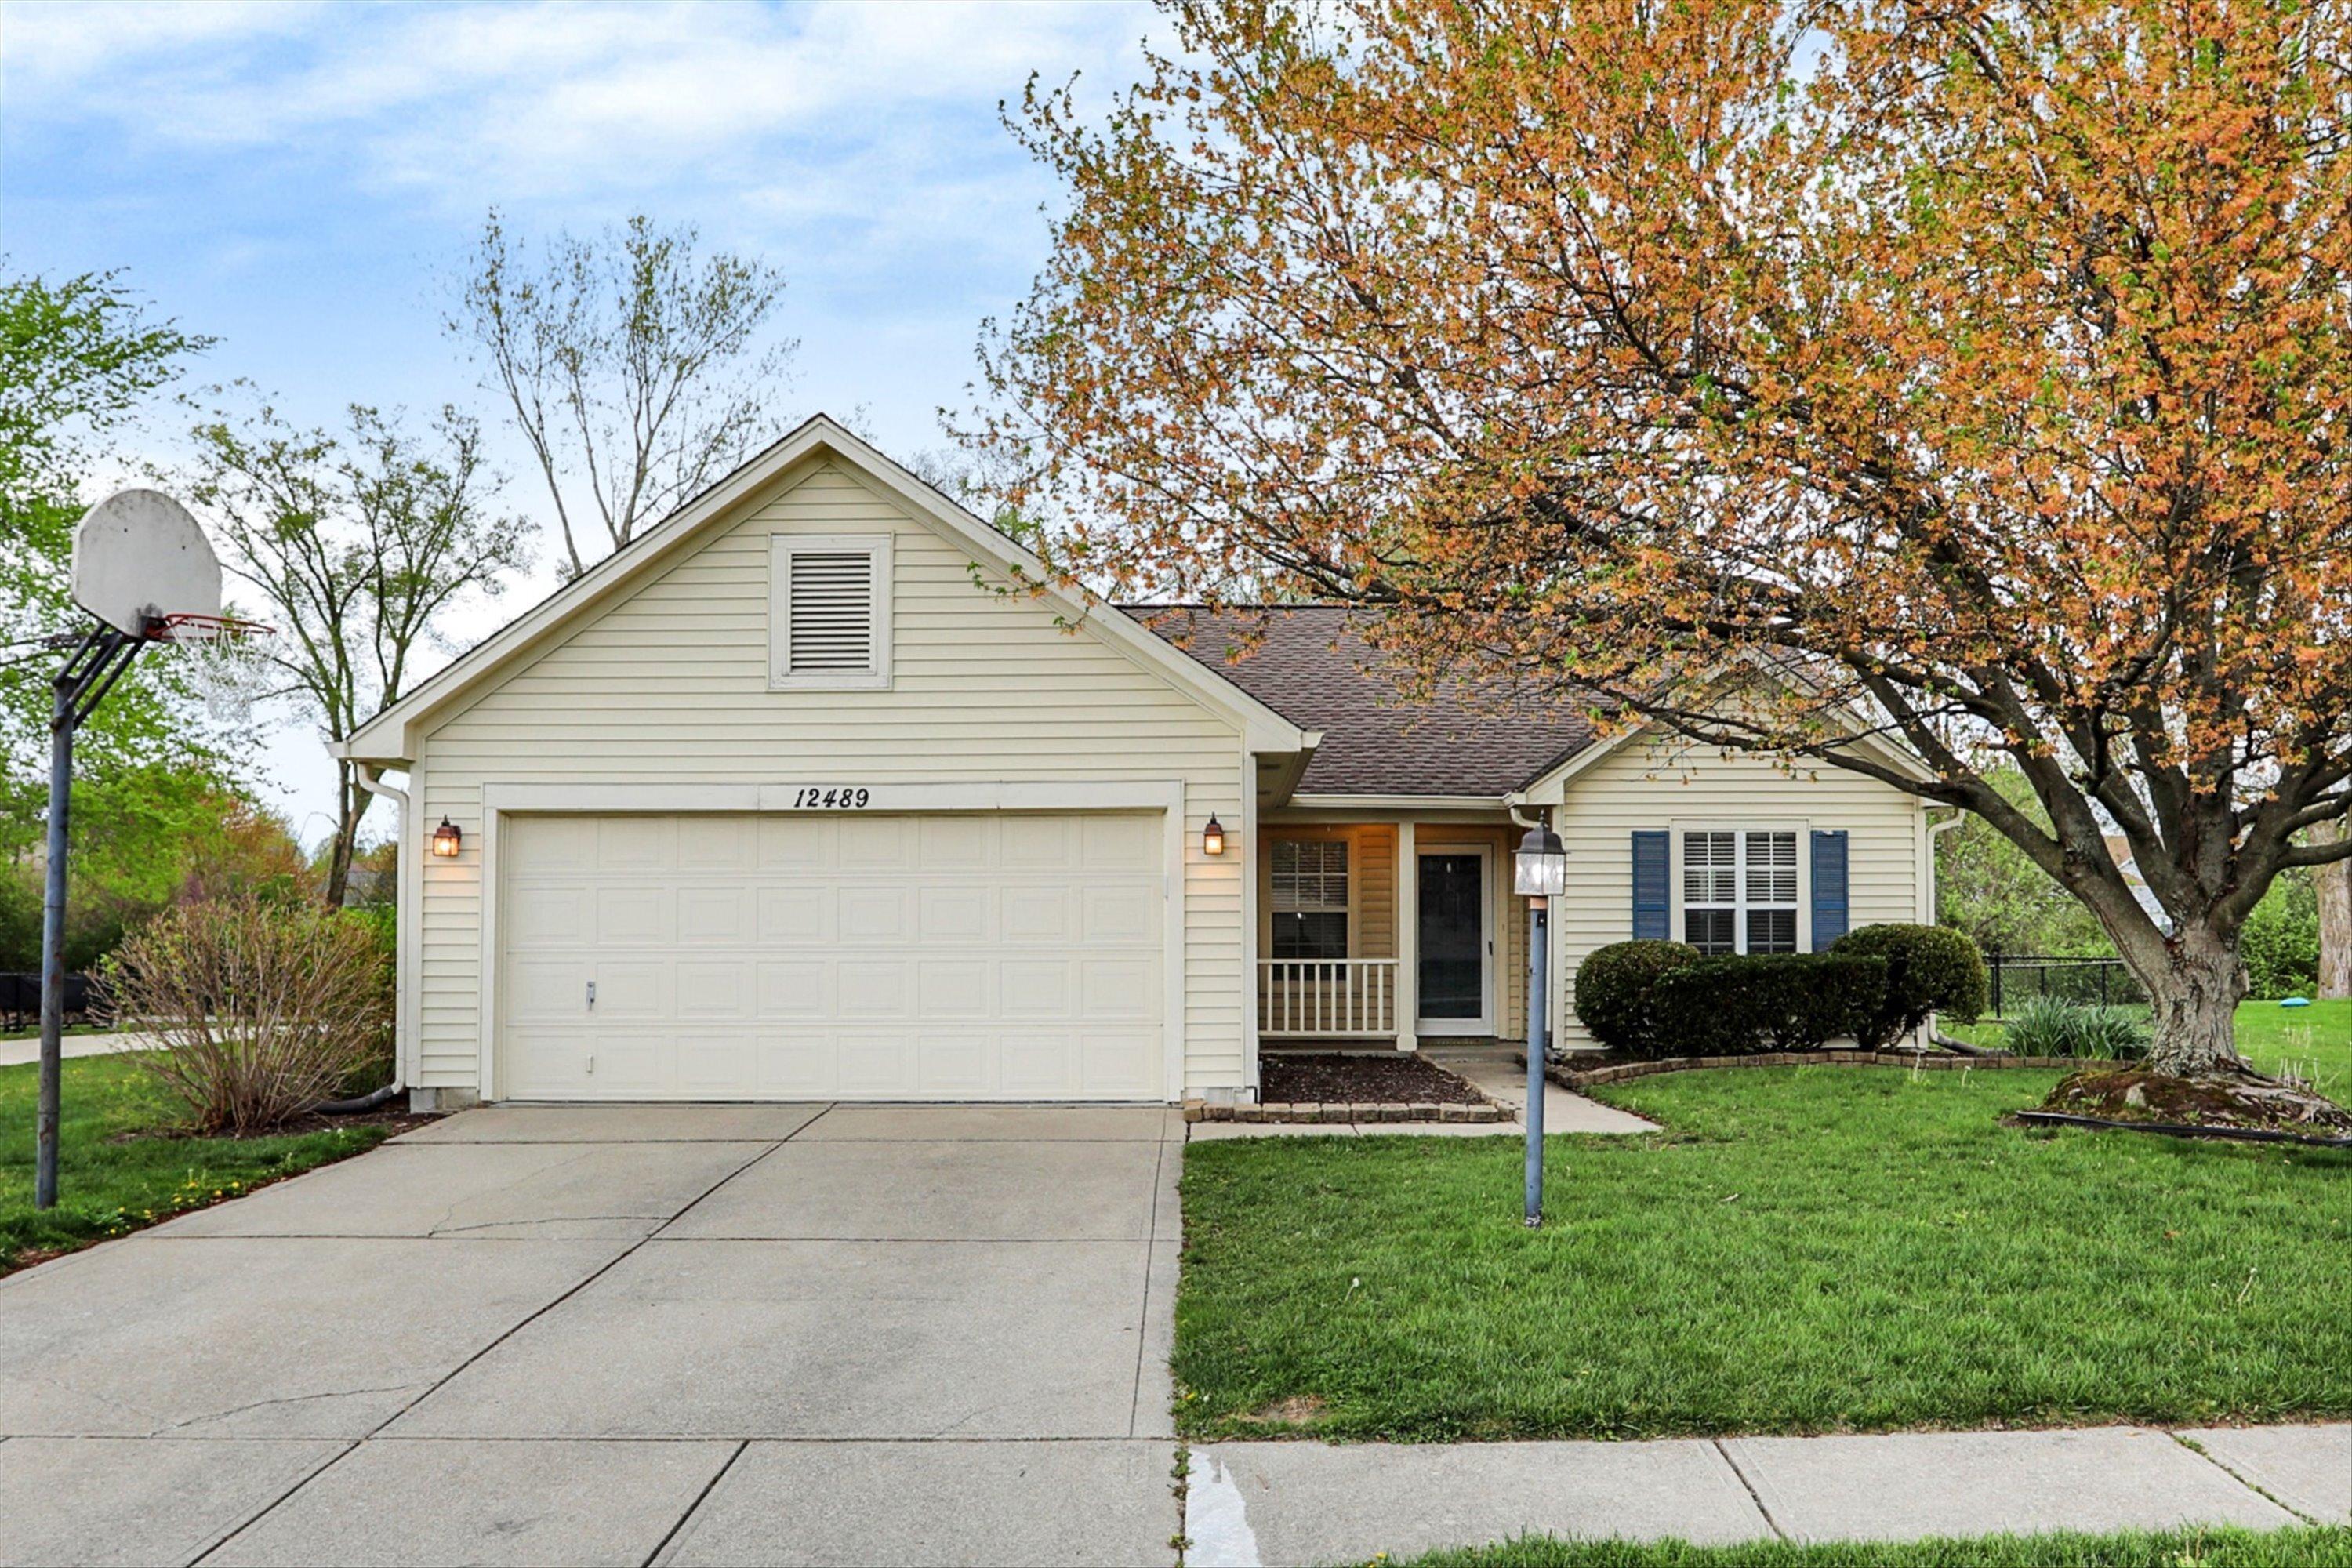 Photo one of 12489 Turkel Dr Fishers IN 46038 | MLS 21974641